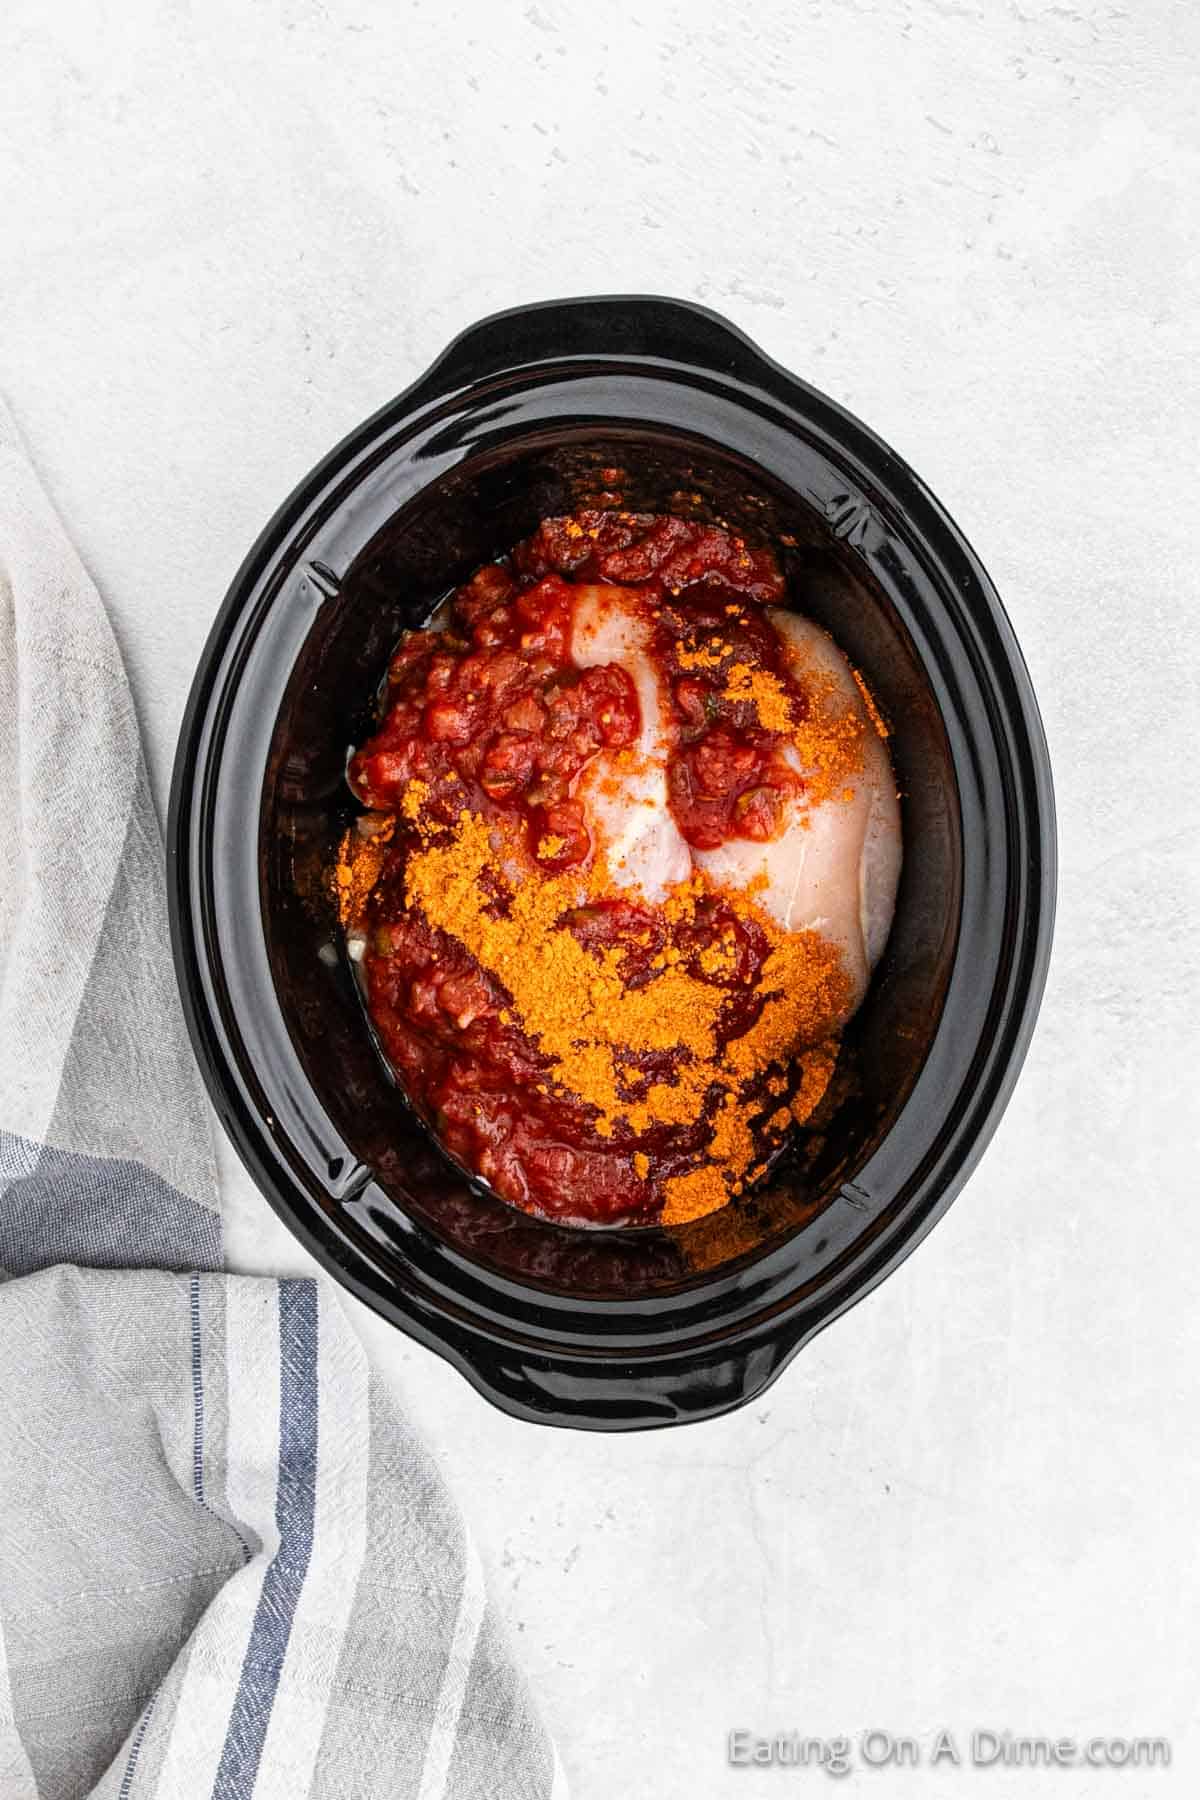 Chicken, salsa, and taco seasoning placed in the crock pot